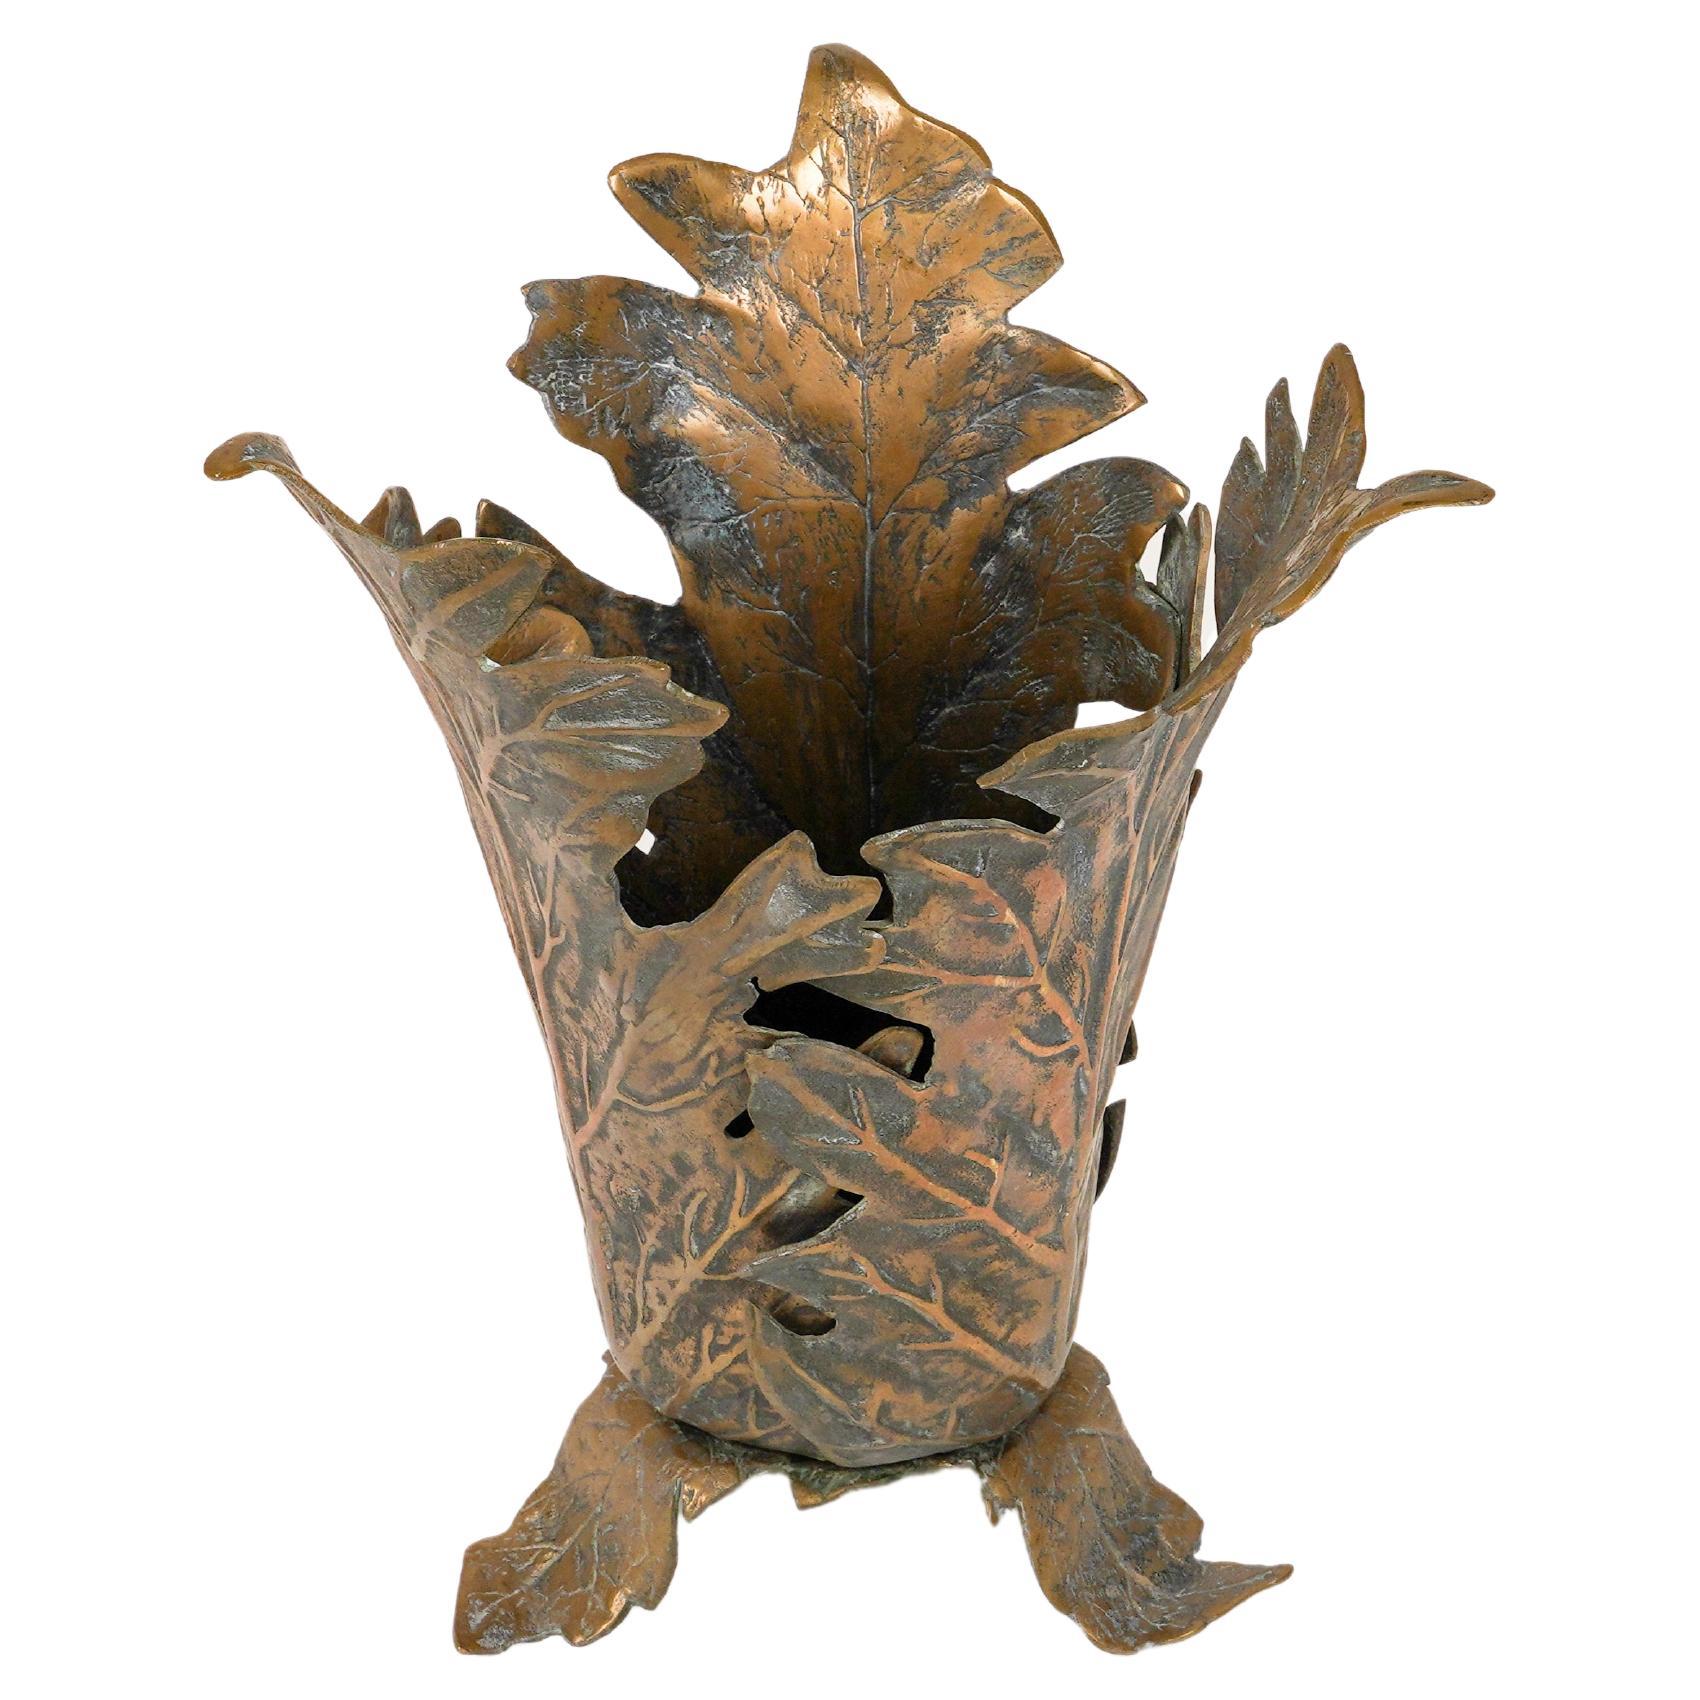 Beautiful Midcentury umbrella stand in bronze oak leaves shaped attributed to François Xavier & Claude Lalanne.

Made in France in the 1970s.

Claude Lalanne was a French sculptor and designer. Her career is closely linked to the duo Les Lalanne